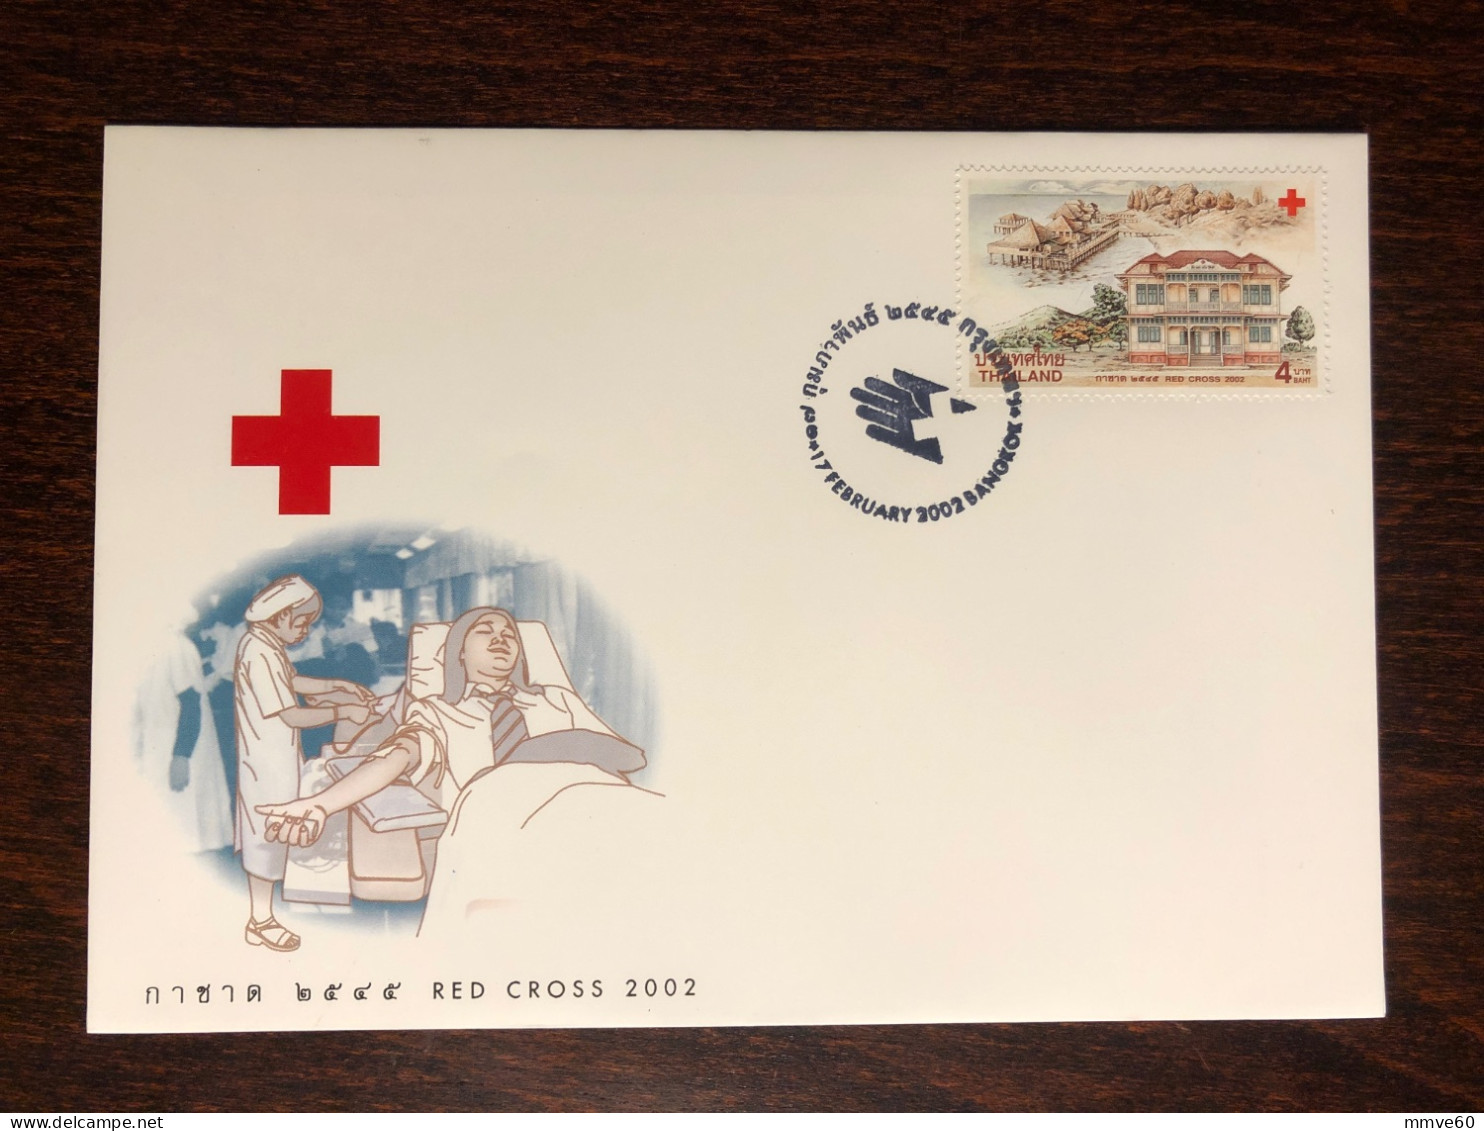 THAILAND FDC COVER 2002 YEAR RED CROSS HOSPITAL HEALTH MEDICINE STAMPS - Tailandia